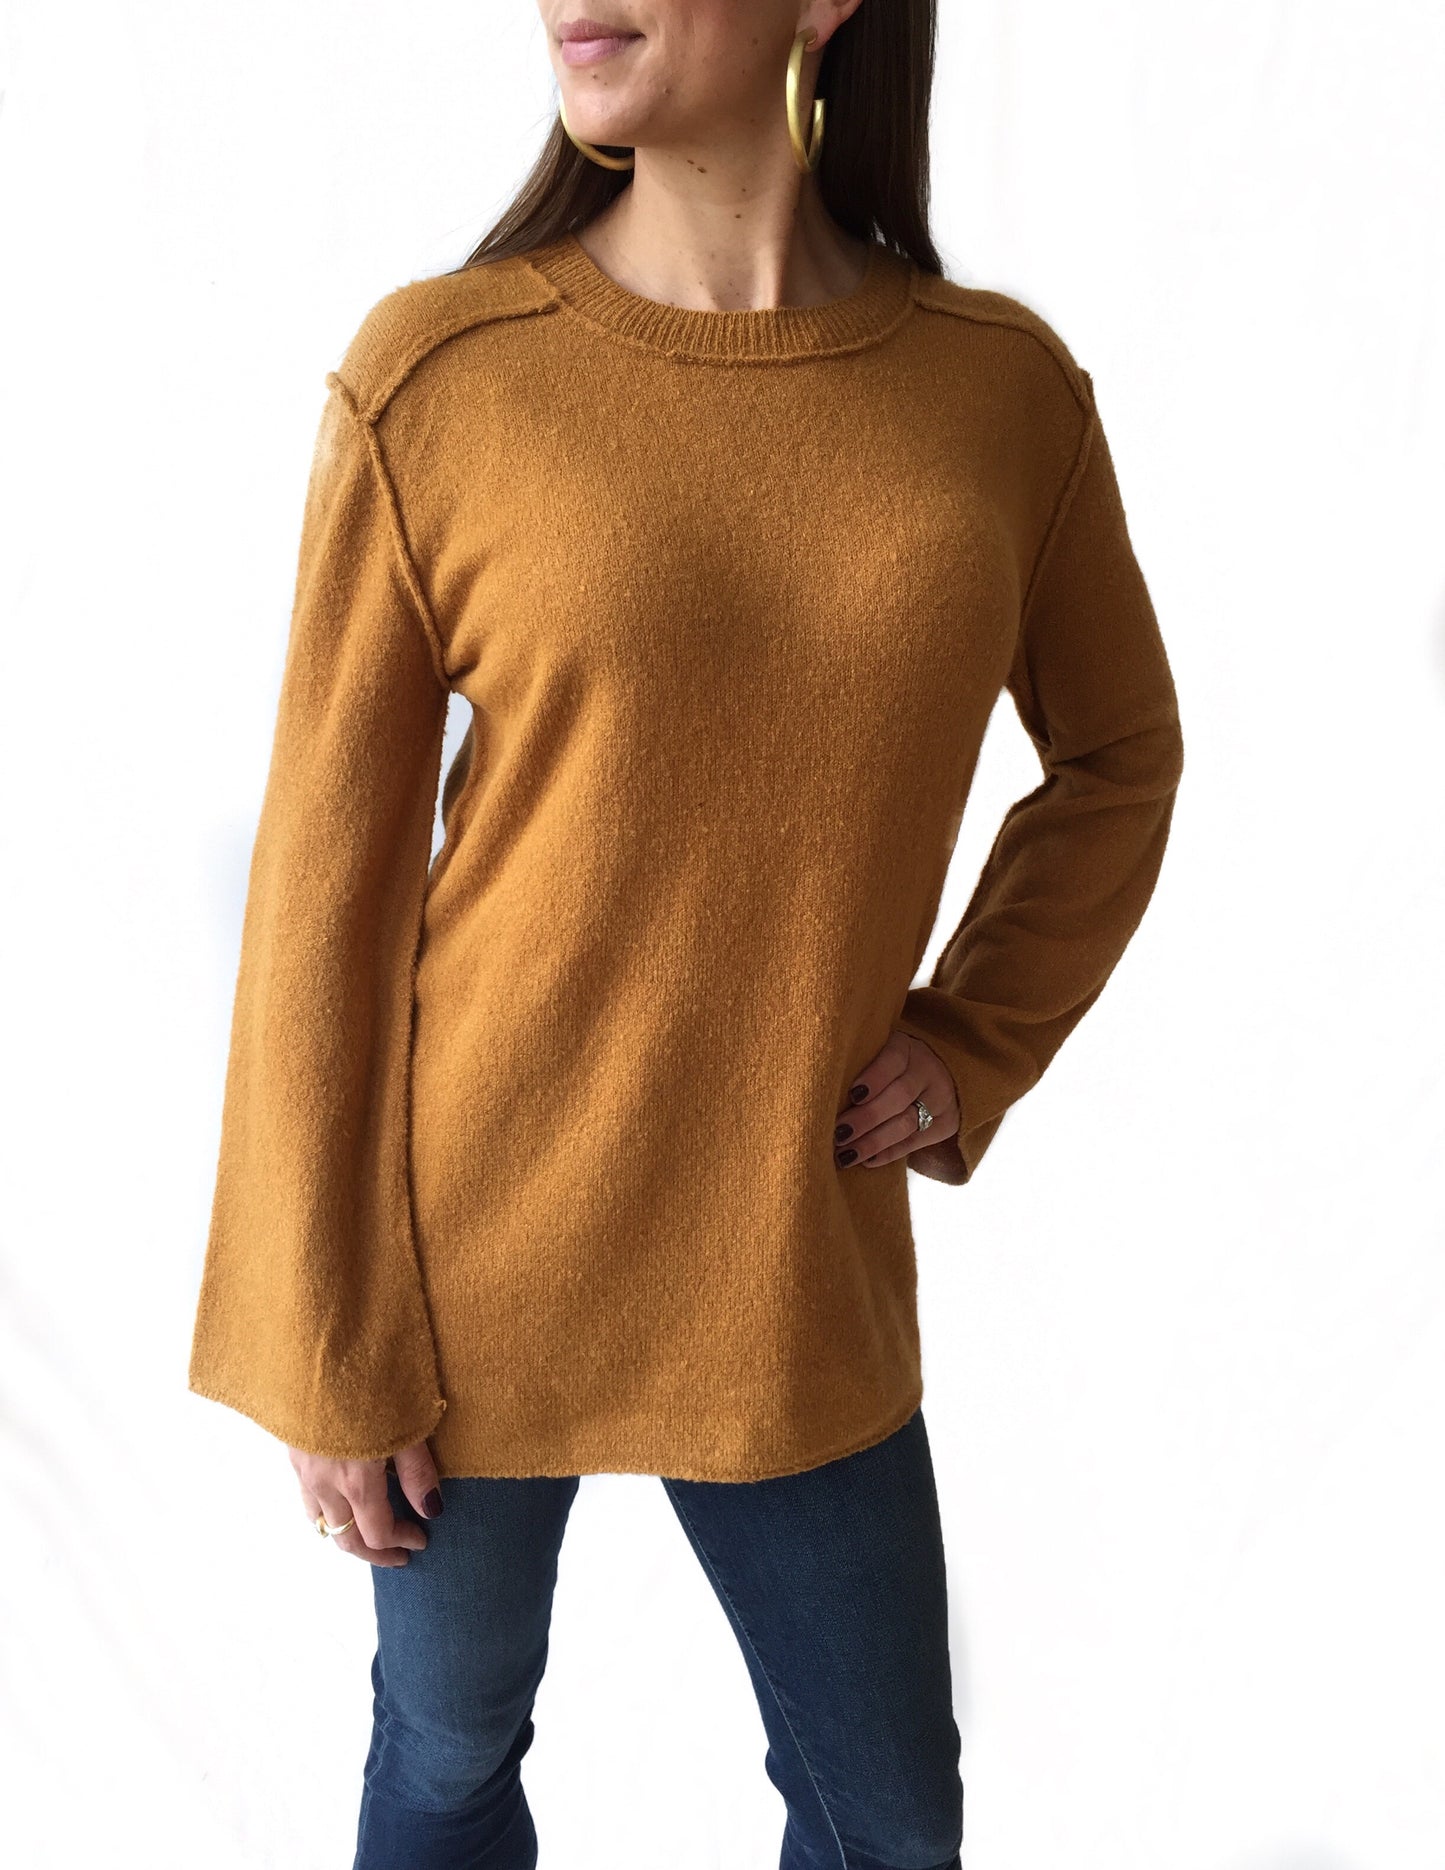 Golden Inside/Out Sweater